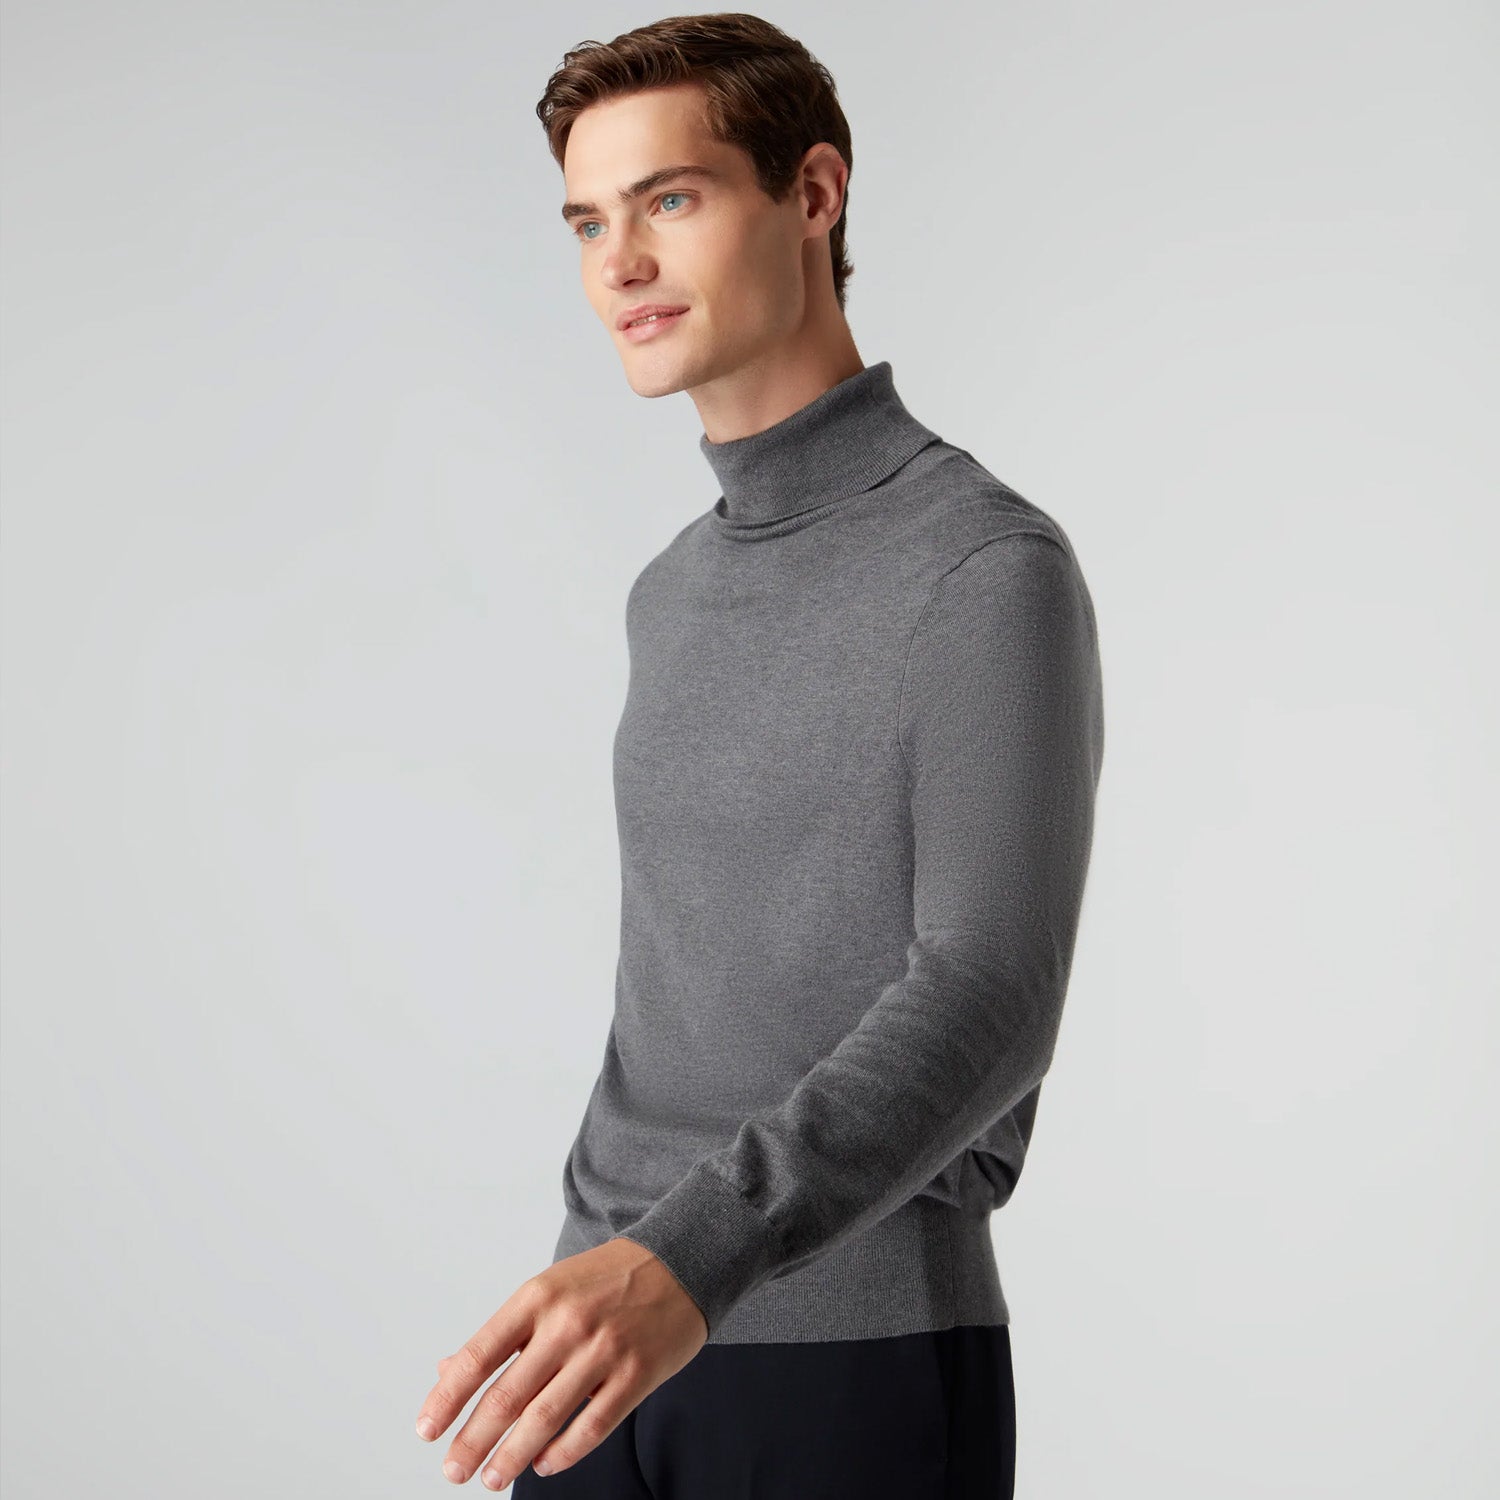 James Bond N.Peal Roll Neck Sweater You Only Live Twice Edition